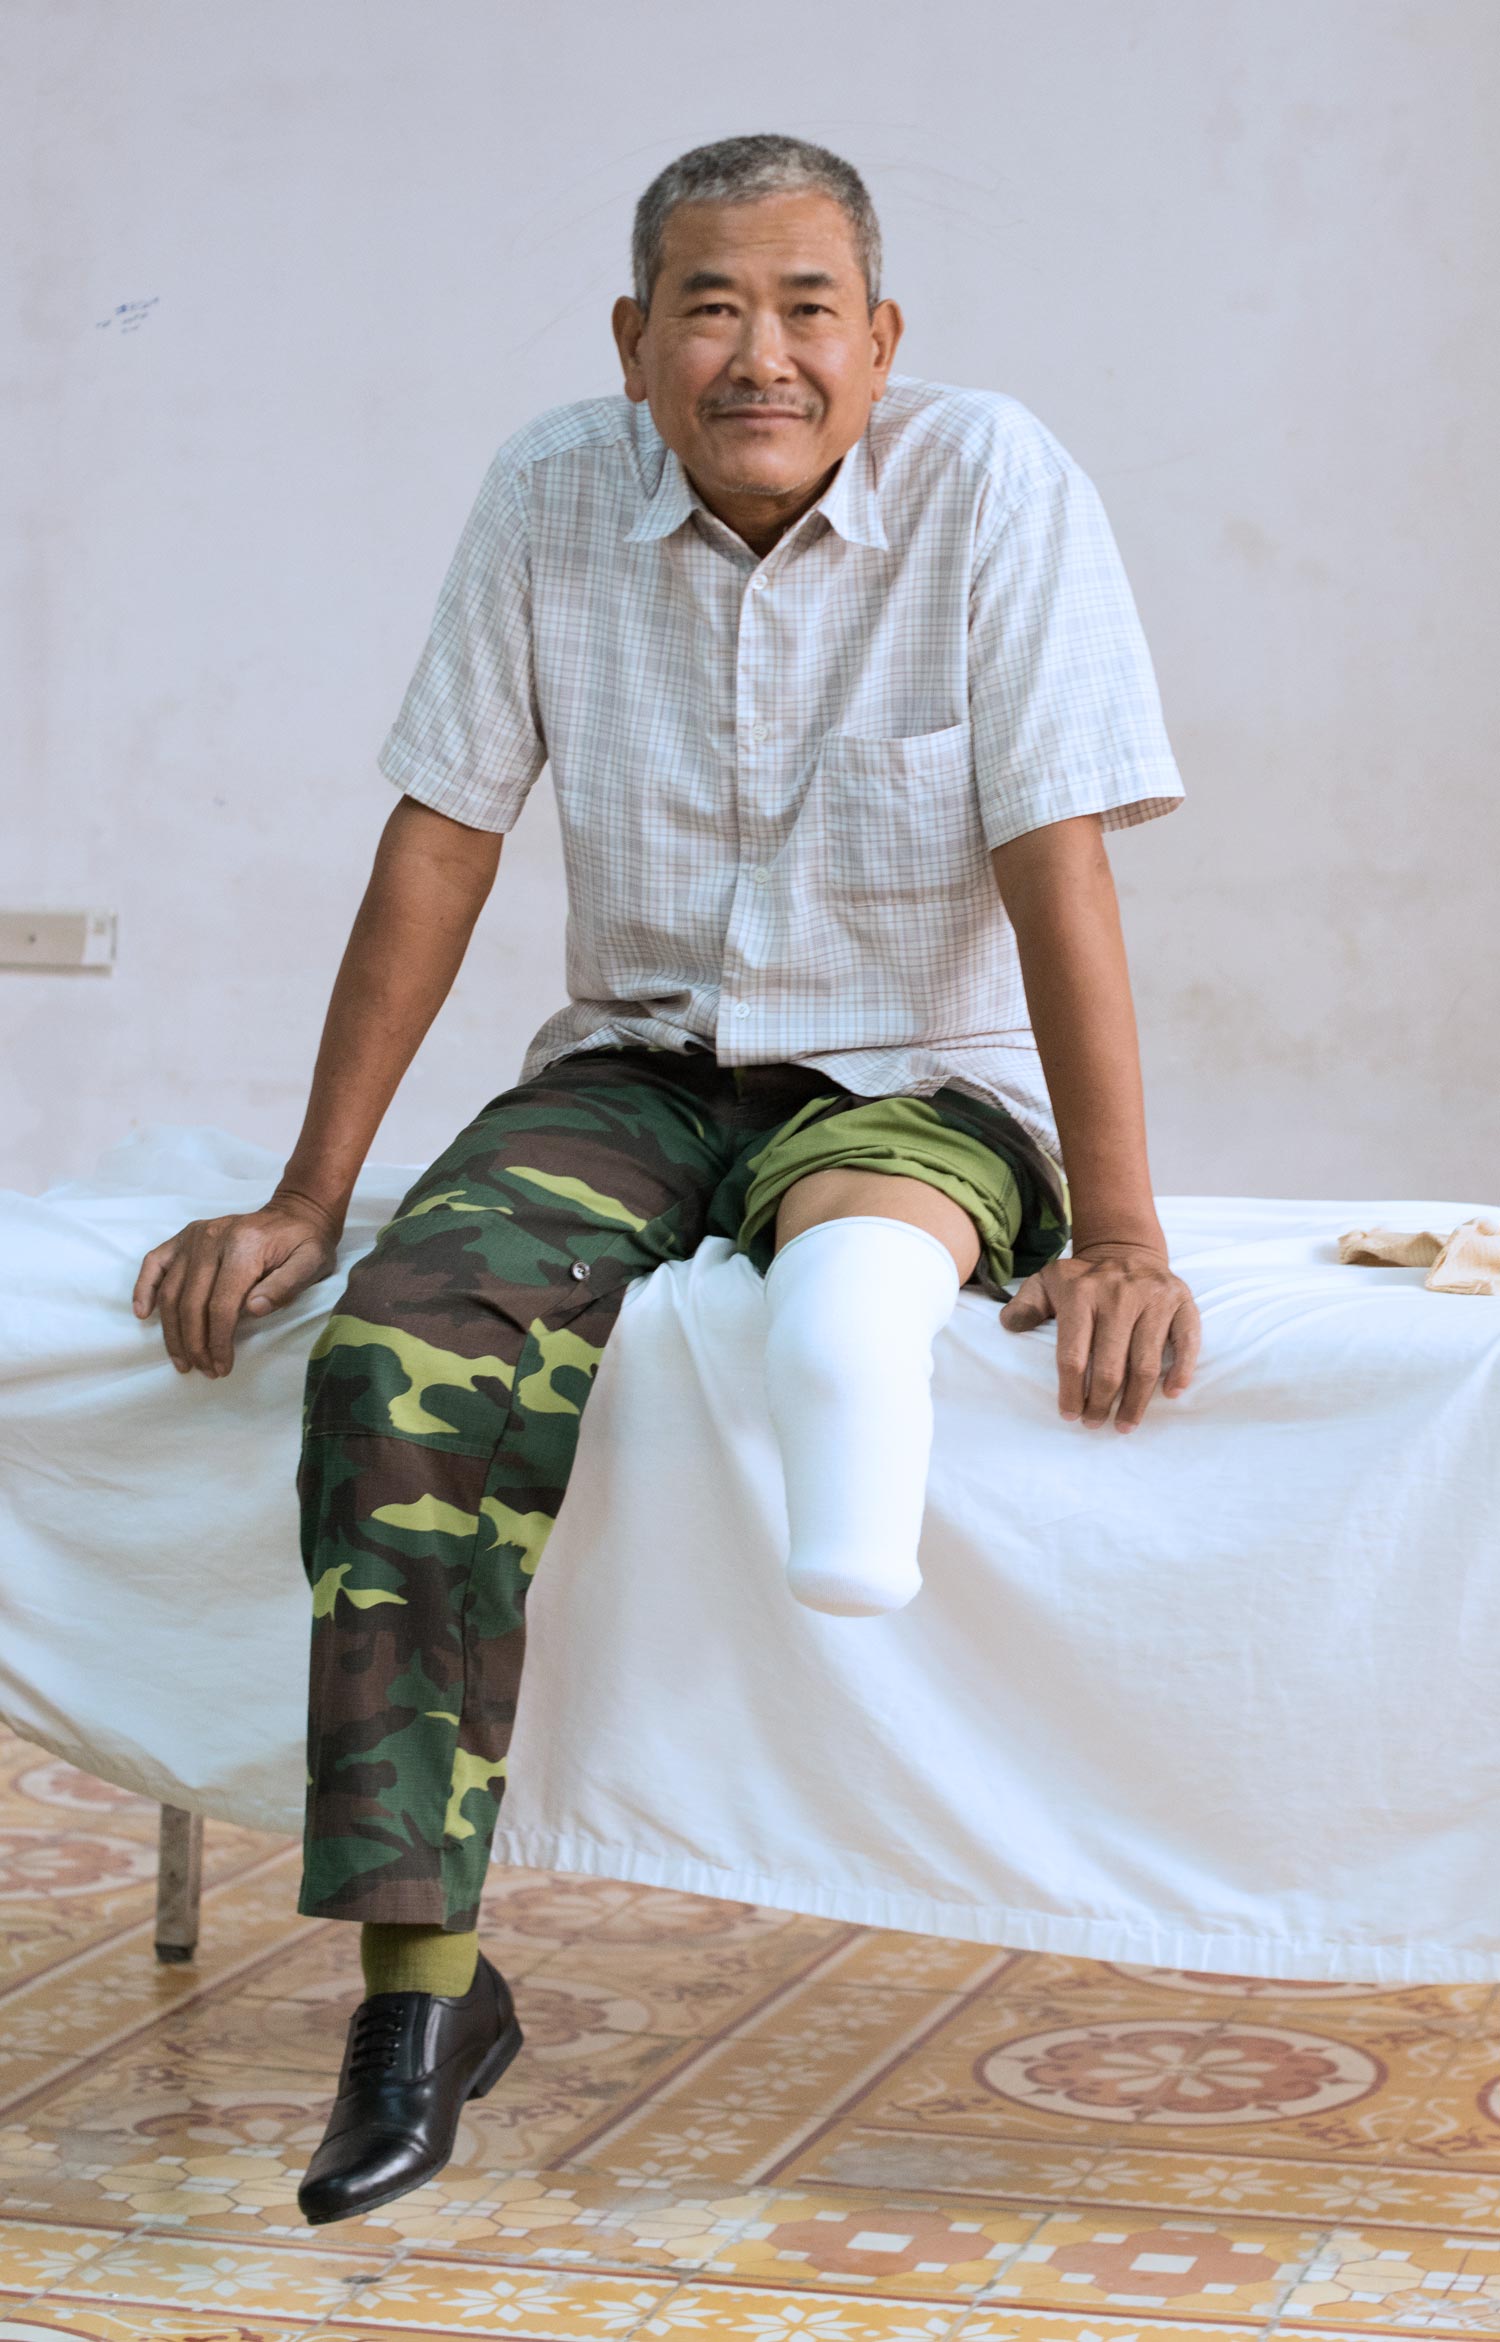 image of a man sitting missing his left leg